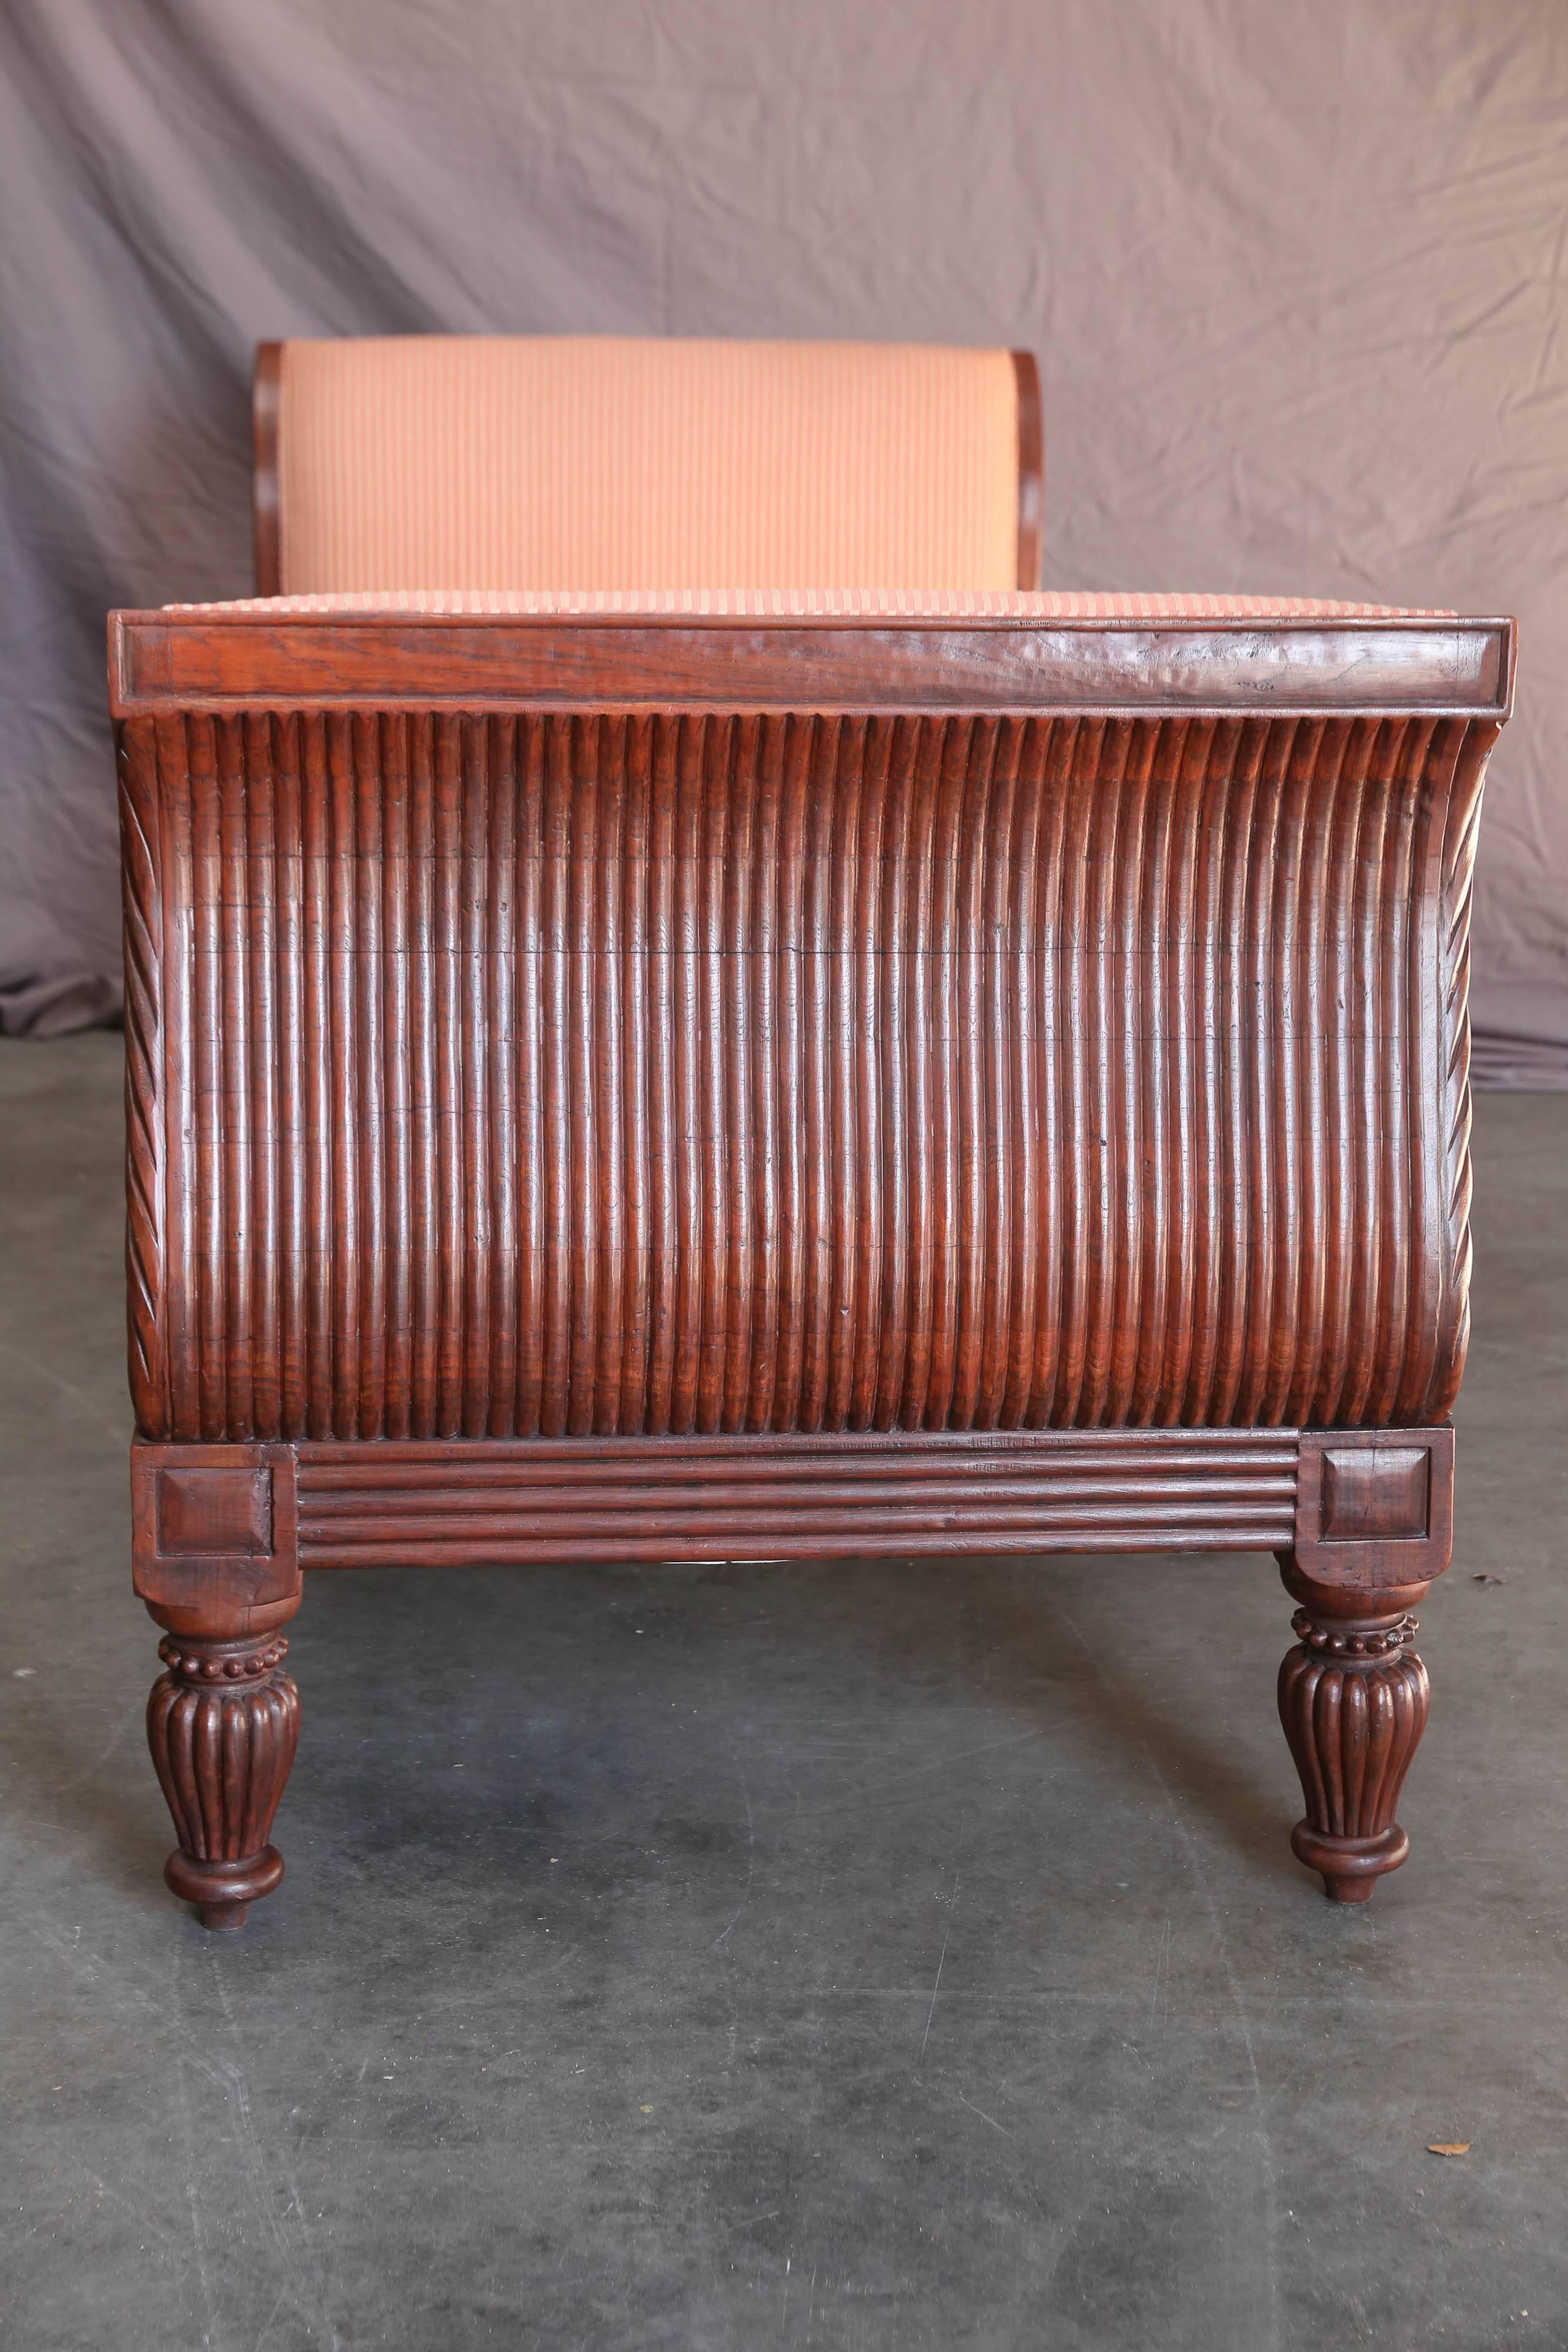 Solid Teak Wood Early 20th Century Upholstered Daybed from a Settler’s Home im Angebot 3